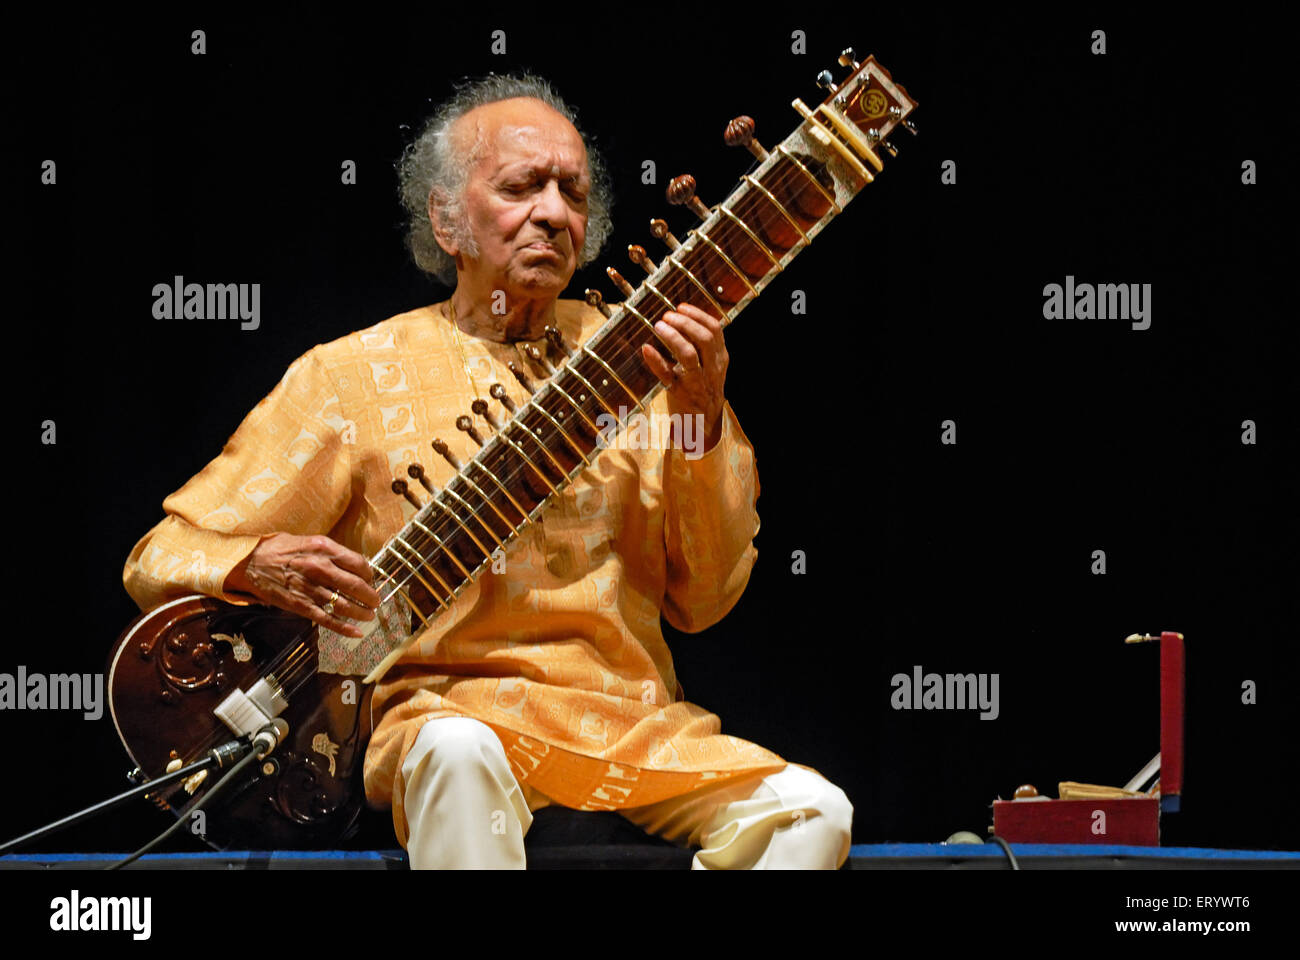 Pandit Ravi Shankar sitar virtuoso Indian classical music maestro Indian  composer playing musical instrument sitar on stage Stock Photo - Alamy